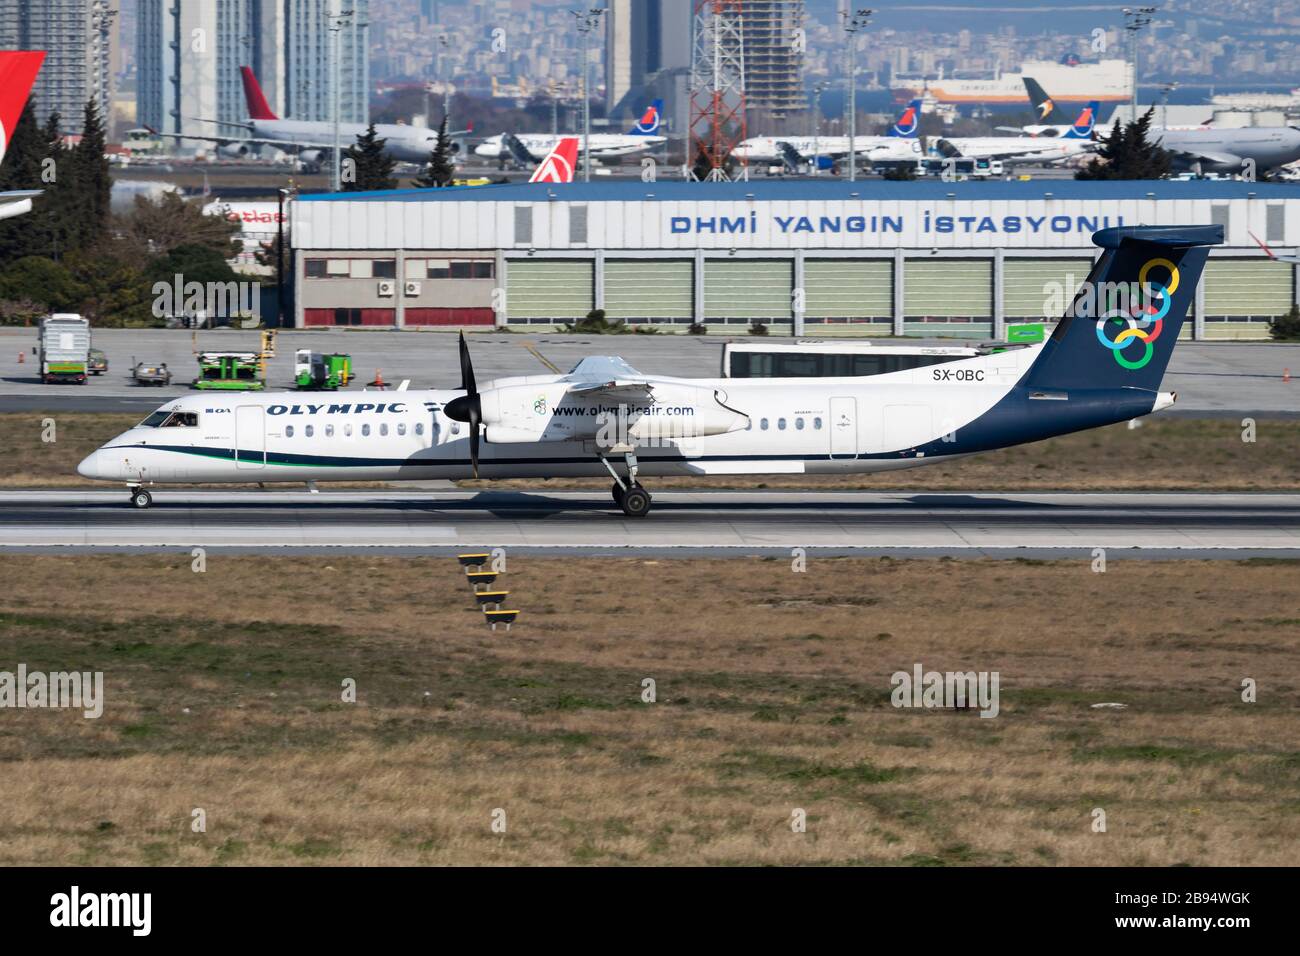 Istanbul / Turkey - March 28, 2019: Olympic Air Bombardier DHC-8 Q400 SX-OBC passenger plane departure at Istanbul Ataturk Airport Stock Photo